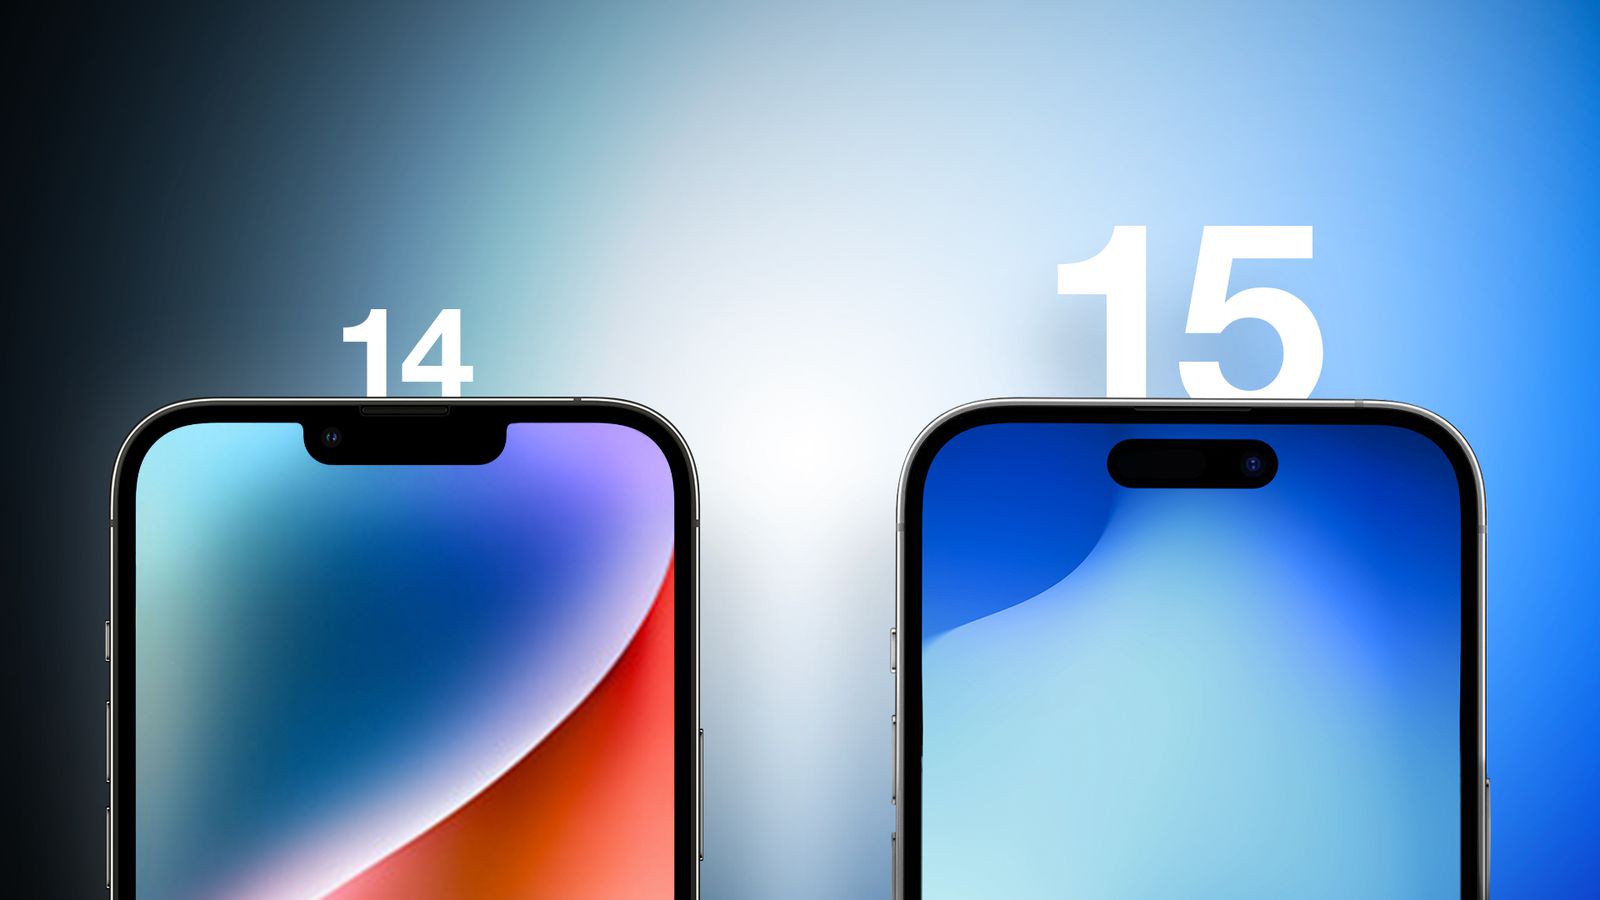 What Are the Differences Between iPhone 14 and iPhone 15